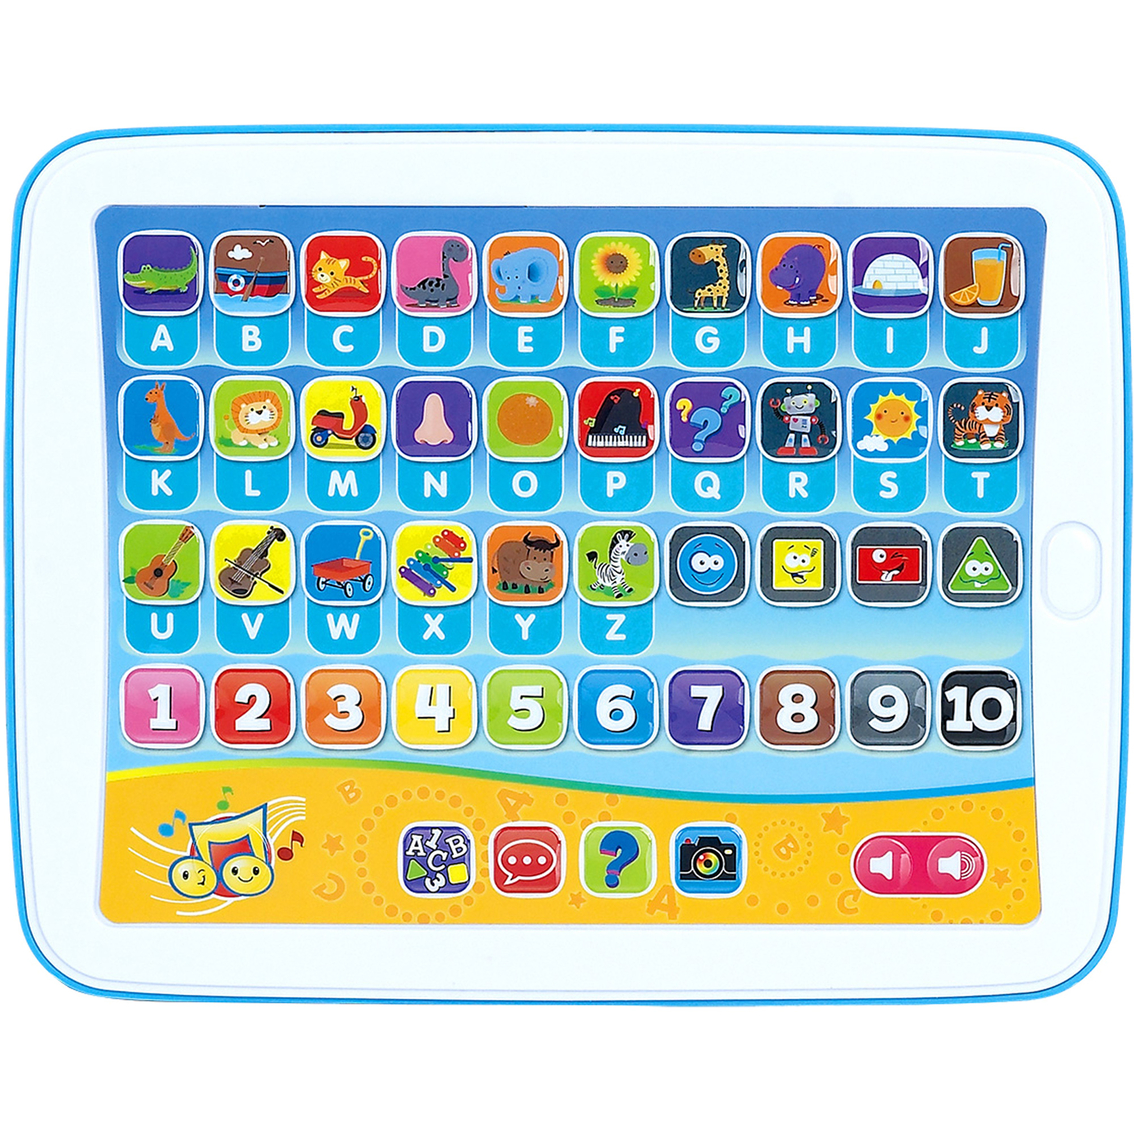 Playgo Learn with me Bilingual Version Smart Tablet - Image 2 of 2